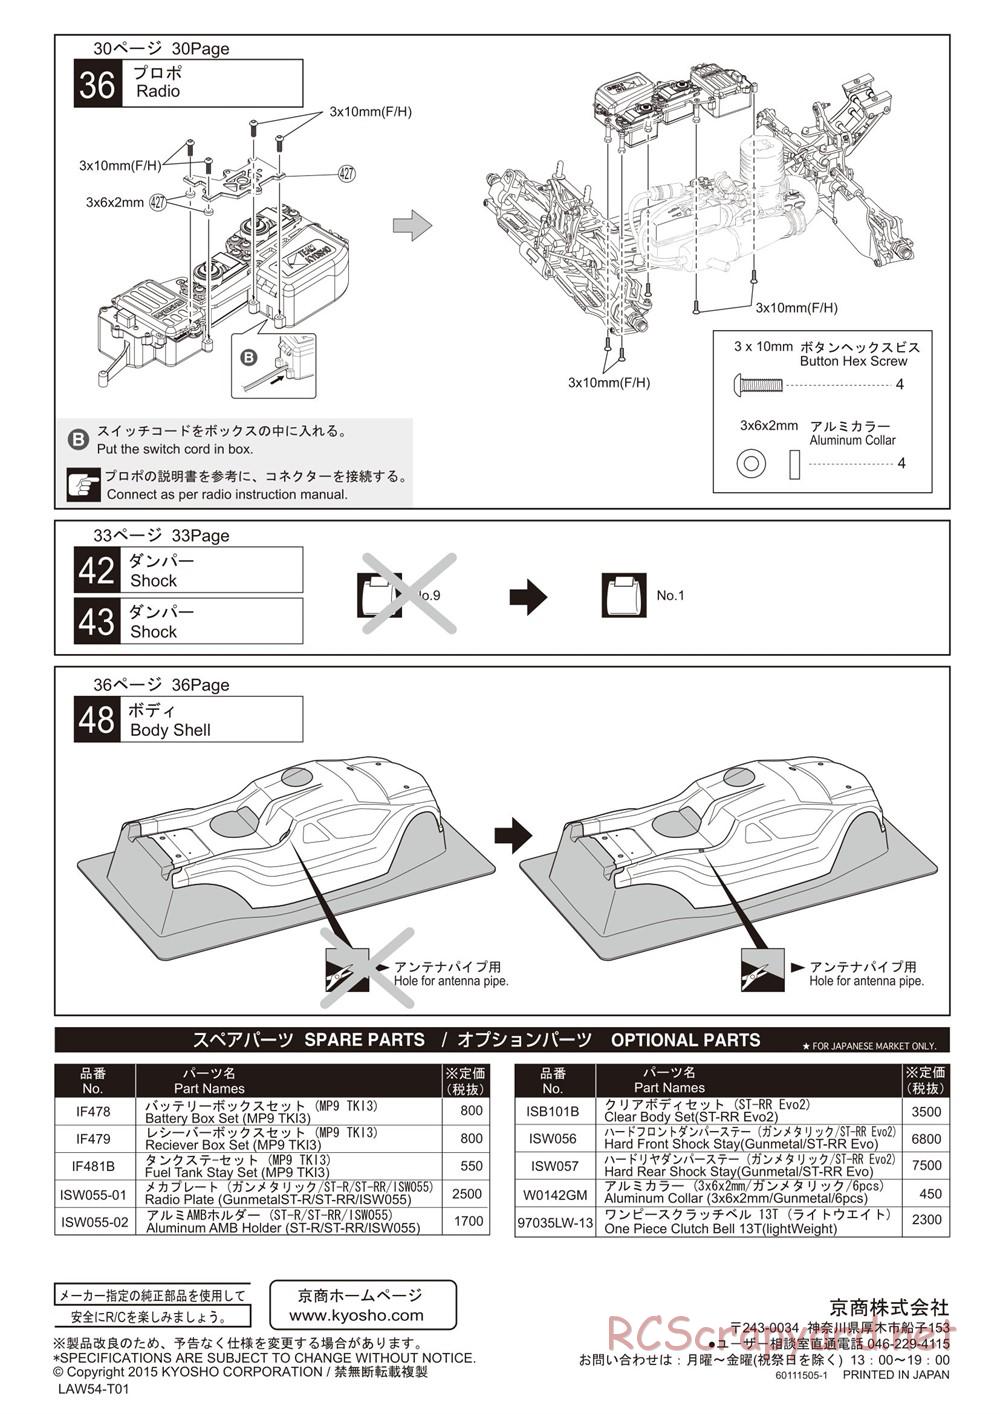 Kyosho - Inferno ST-RR Evo.2 - Manual - Page 4